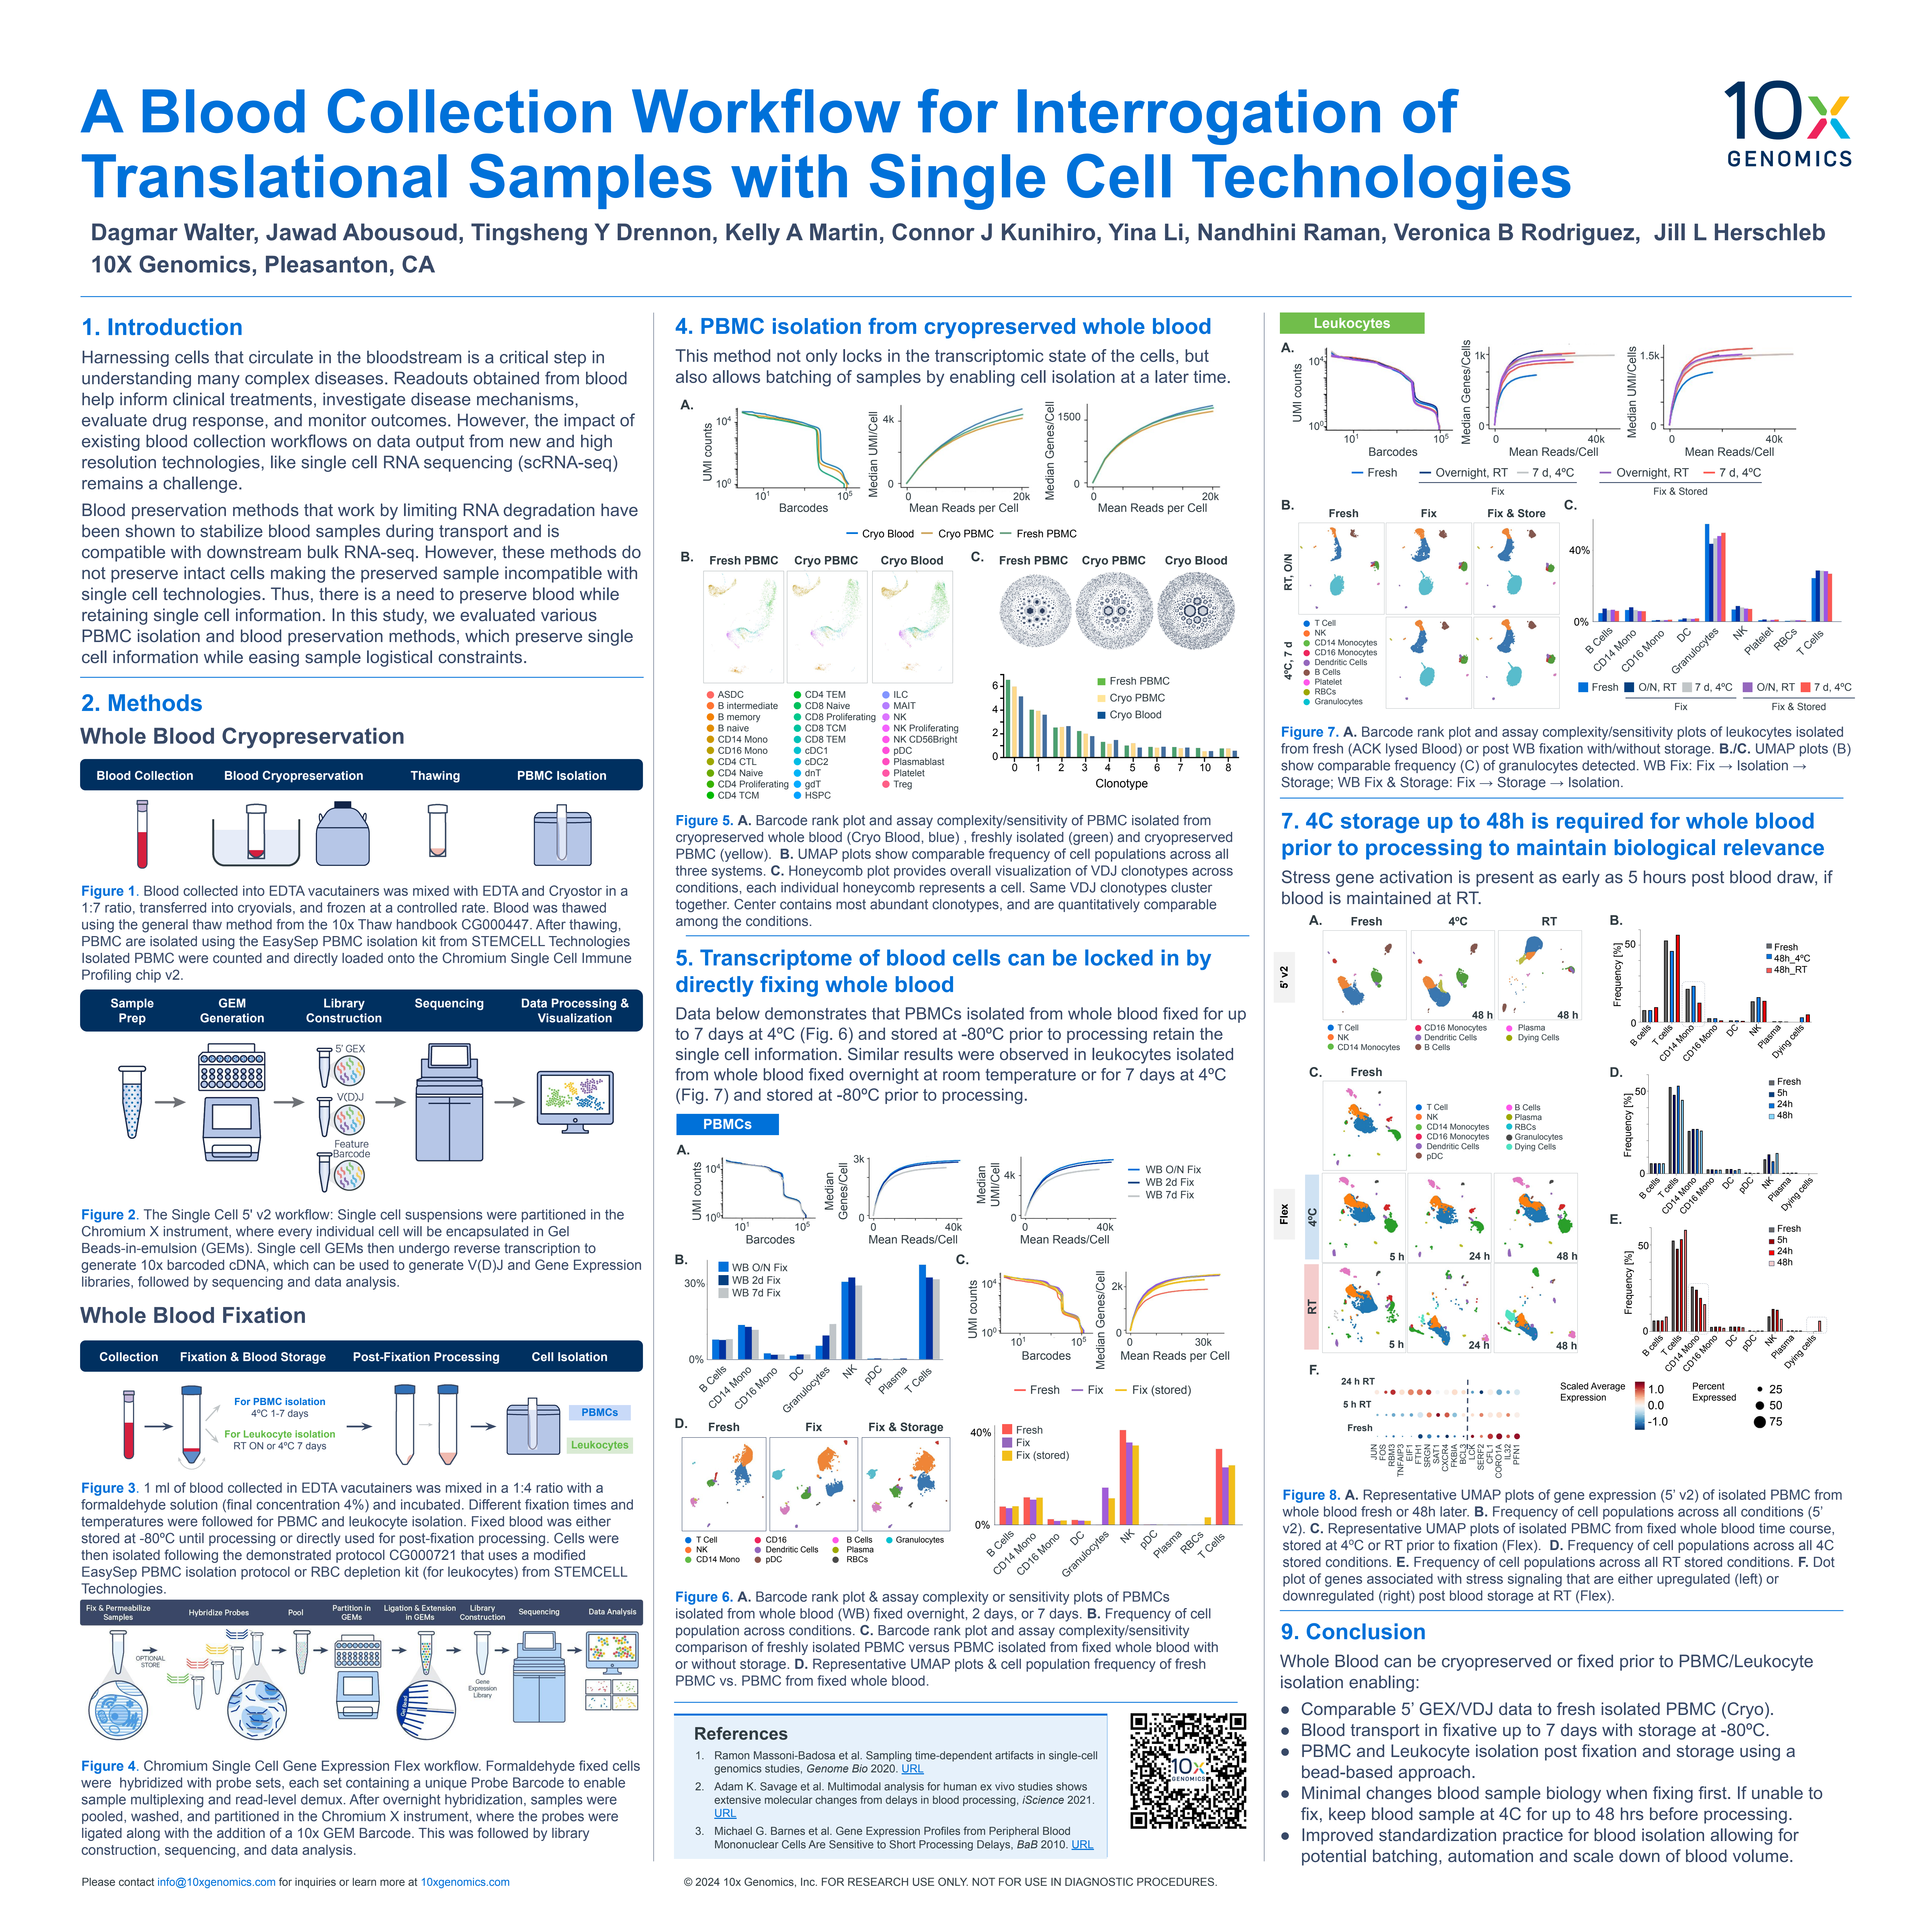 A Blood Collection Workflow for Interrogation of Translational Samples with Single Cell Technologies